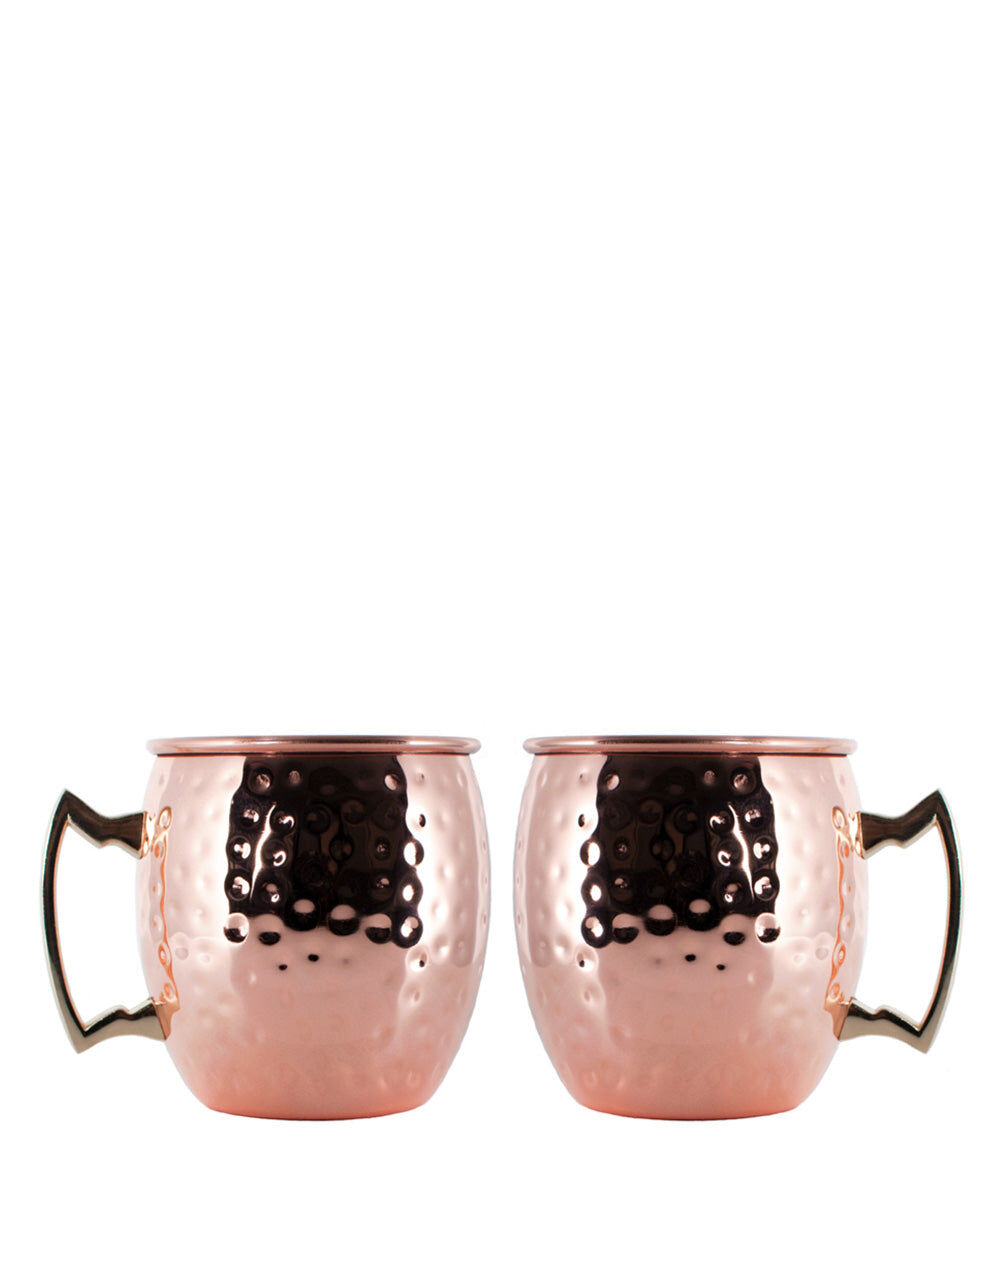 Rolf Glass Copper Hammered Moscow Mule Mug (Set of 2), , main_image